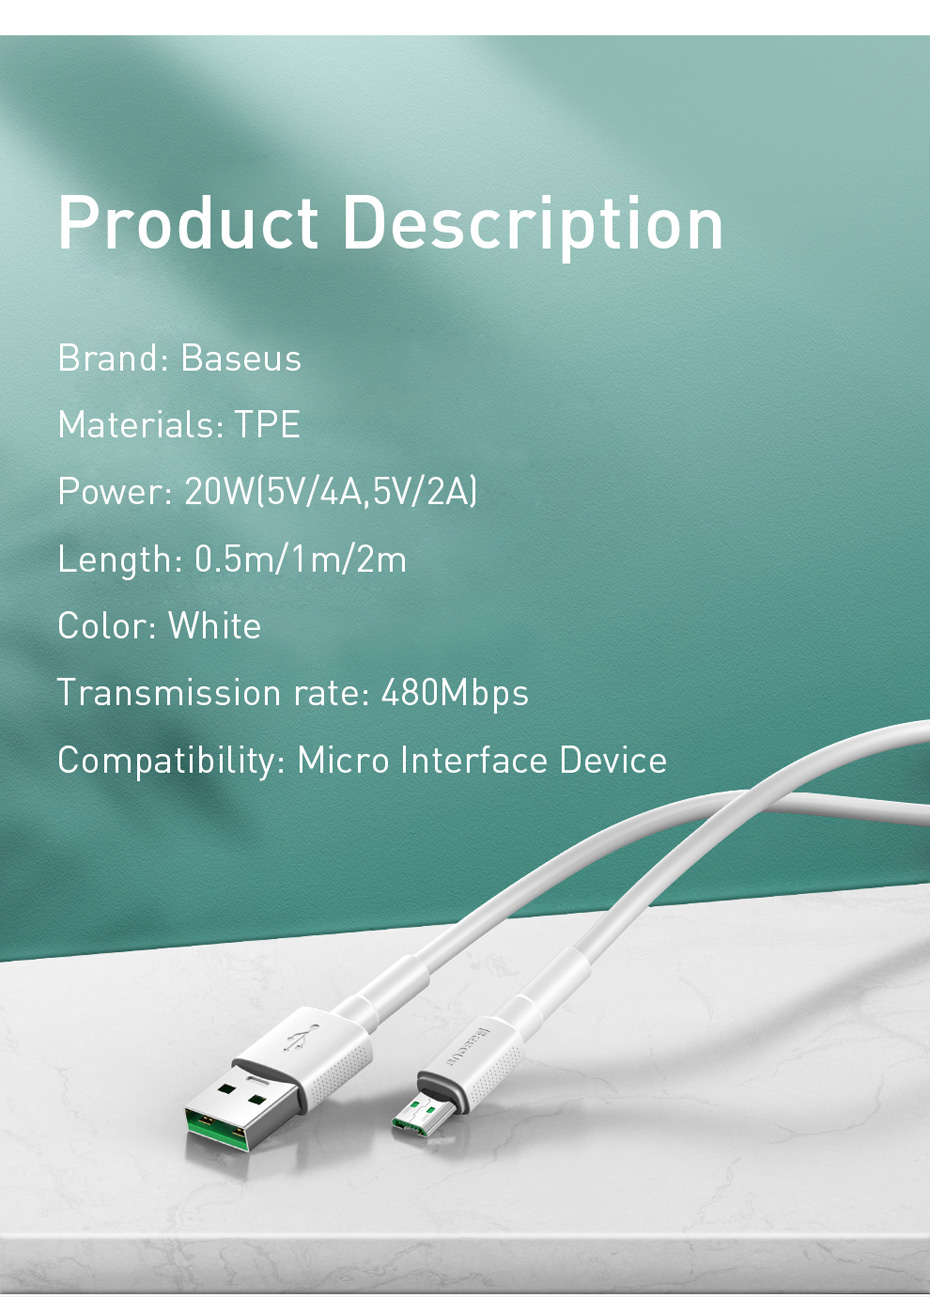 Baseus-VOOC-Dash-Charging-20w-Quick-Micro-USB-Data-Cable-for-Find-7-Series-N3-1564324-12